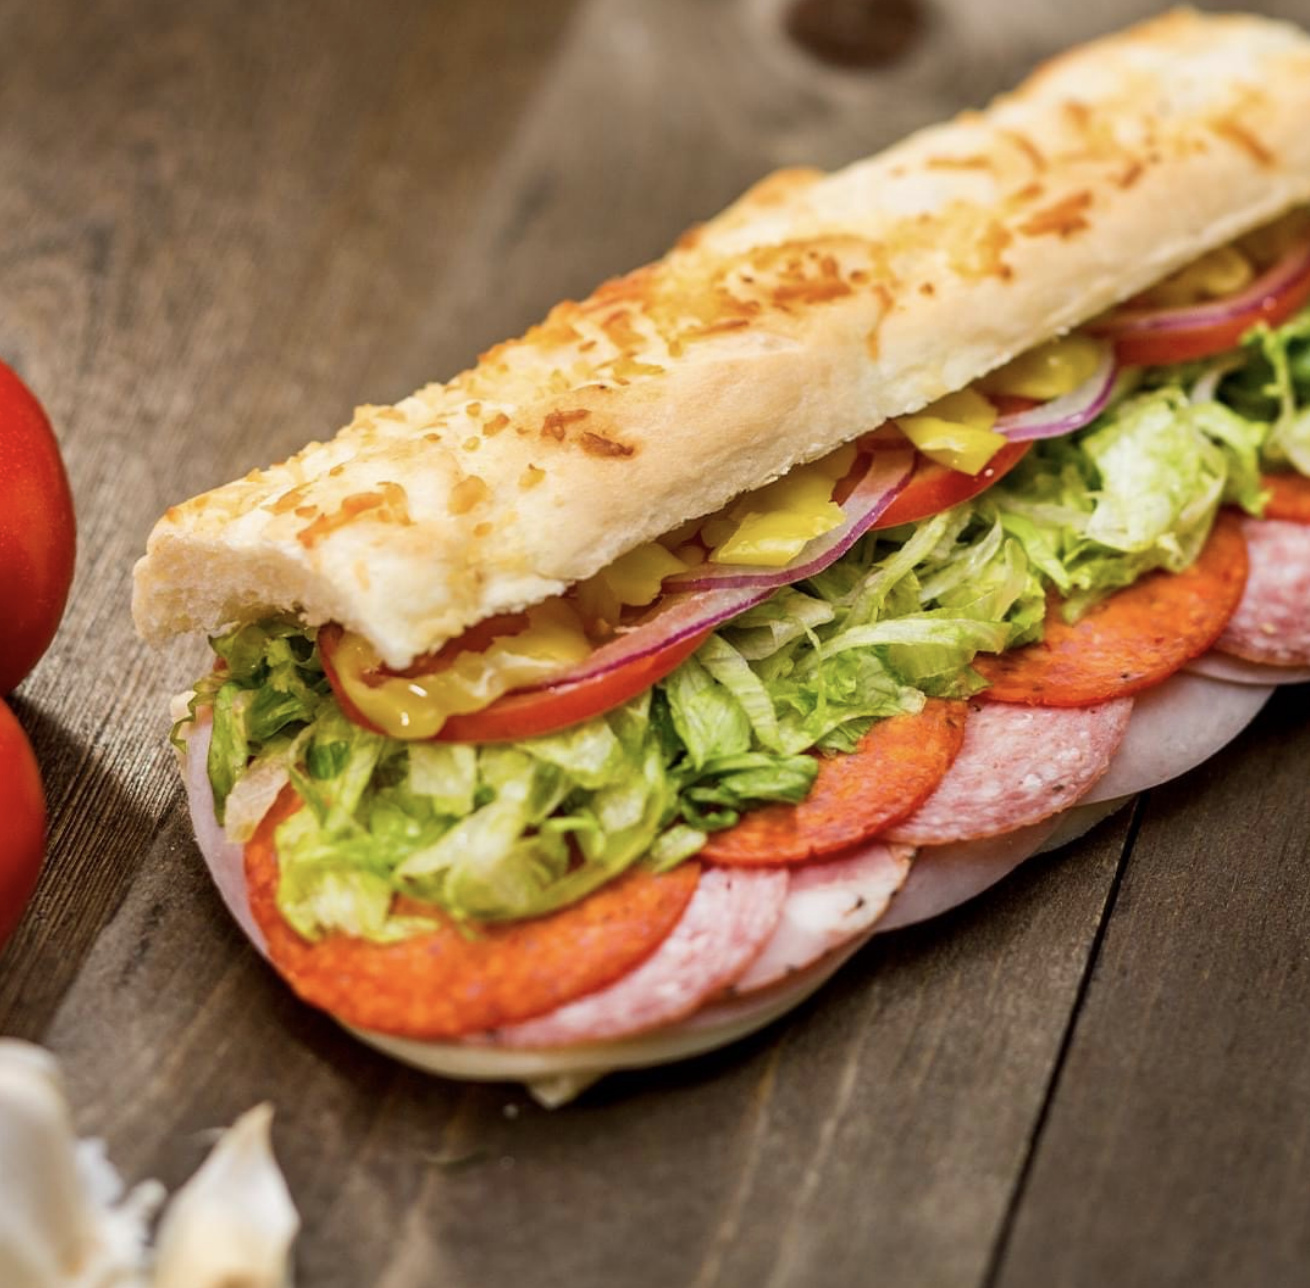 Exclusive, Turnkey Sandwich Shop in Bend, OR